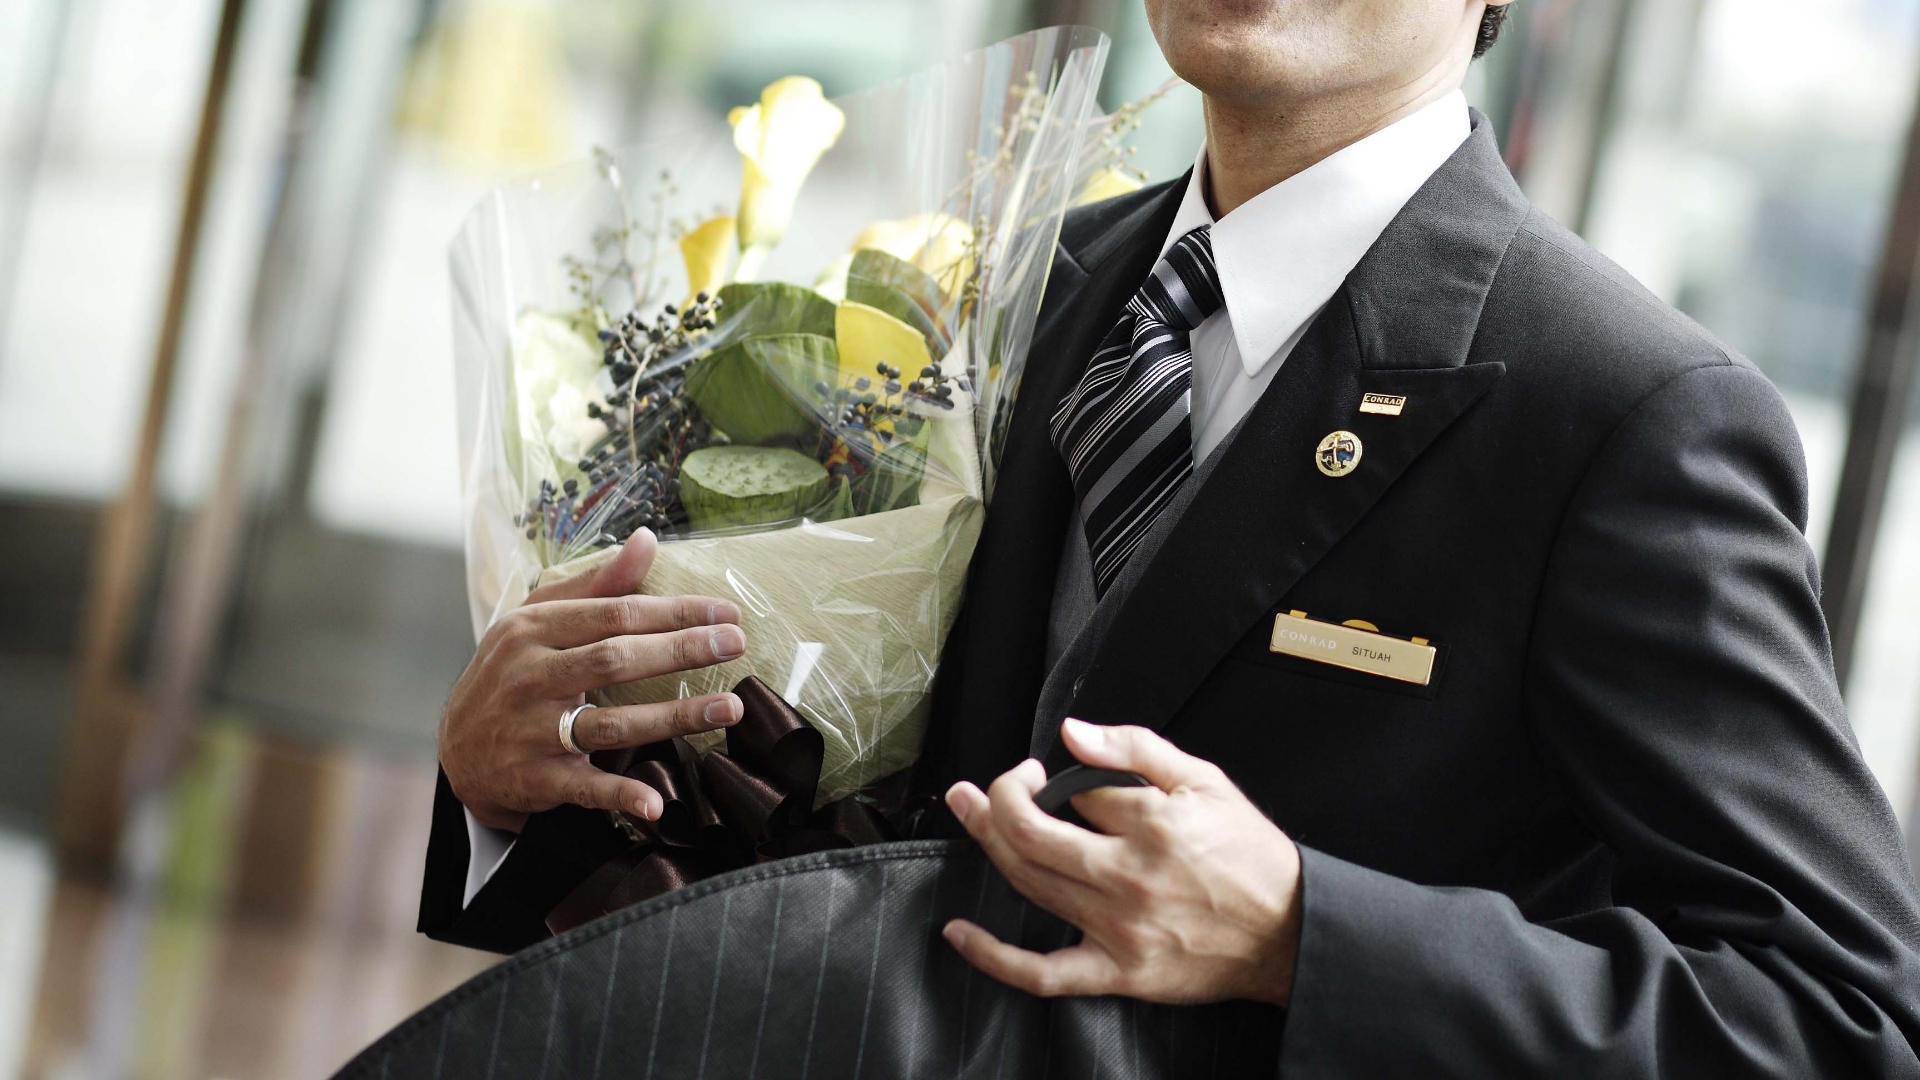 Hospitality service by staff in Conrad Hotel